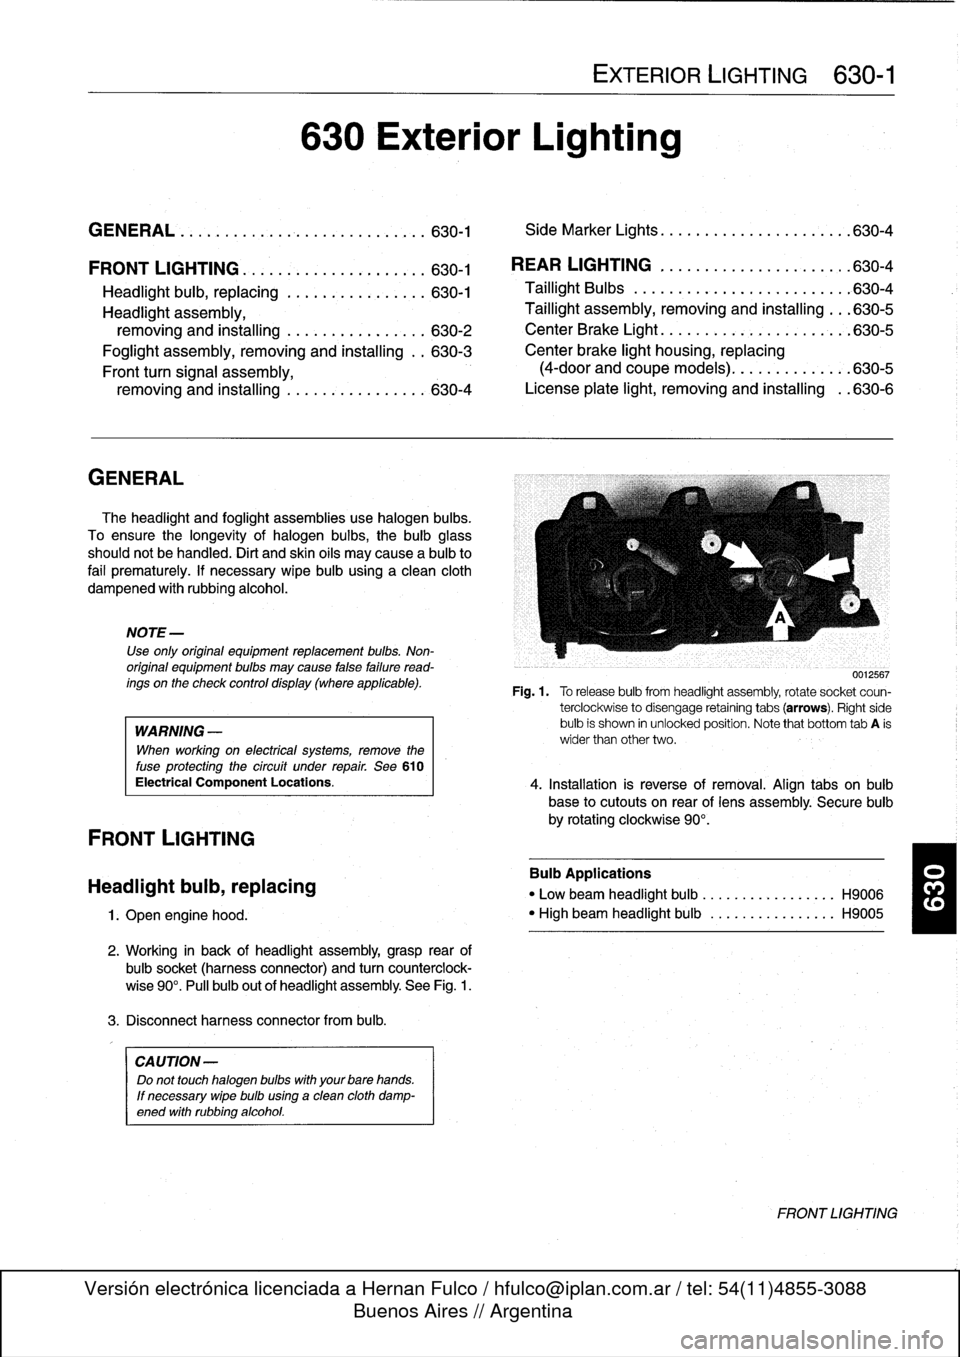 BMW 318i 1996 E36 Workshop Manual 
FRONT
LIGHTING
.
...........
.
....
.
.
.
.
630-1

Headlight
buib,
replacing
............
.
.
.
.
630-1
Headlight
assembly,

removing
and
installing
.......
.
....
.
.
.
.
630-2

Foglight
assembly,
r